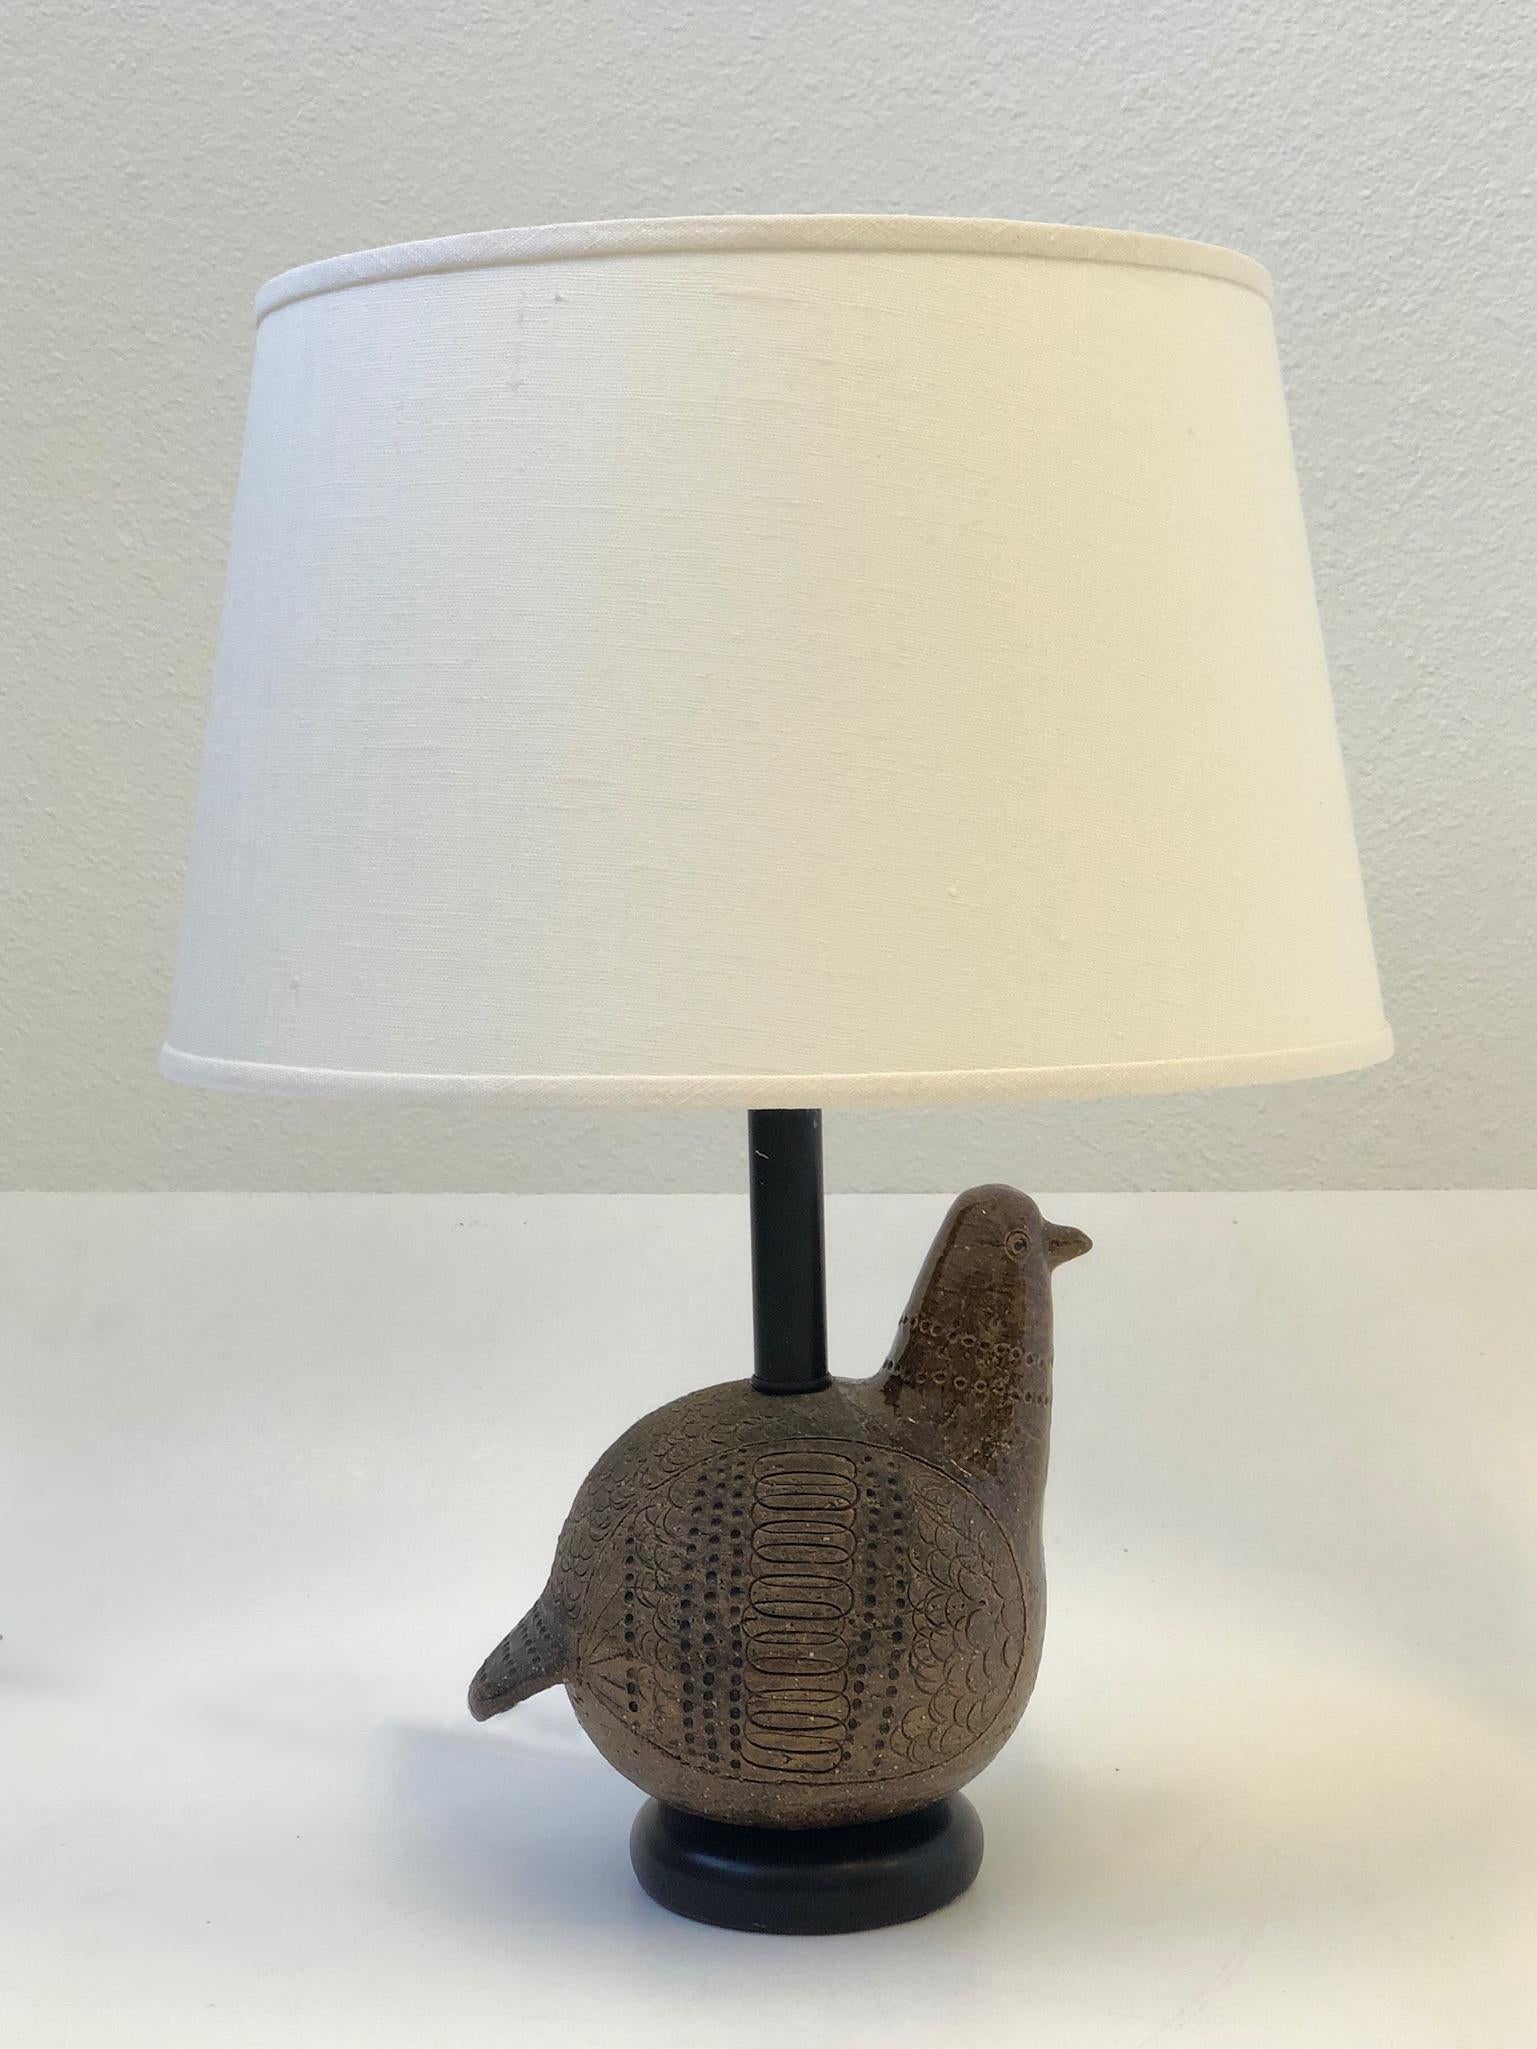 A beautiful 1970s Italian brown ceramic and brass table lamp by Bitossi.
Newly rewired with polish brass hardware and new vanilla linen shade.
Measurements: 21.25” high and 16” diameter with shade.